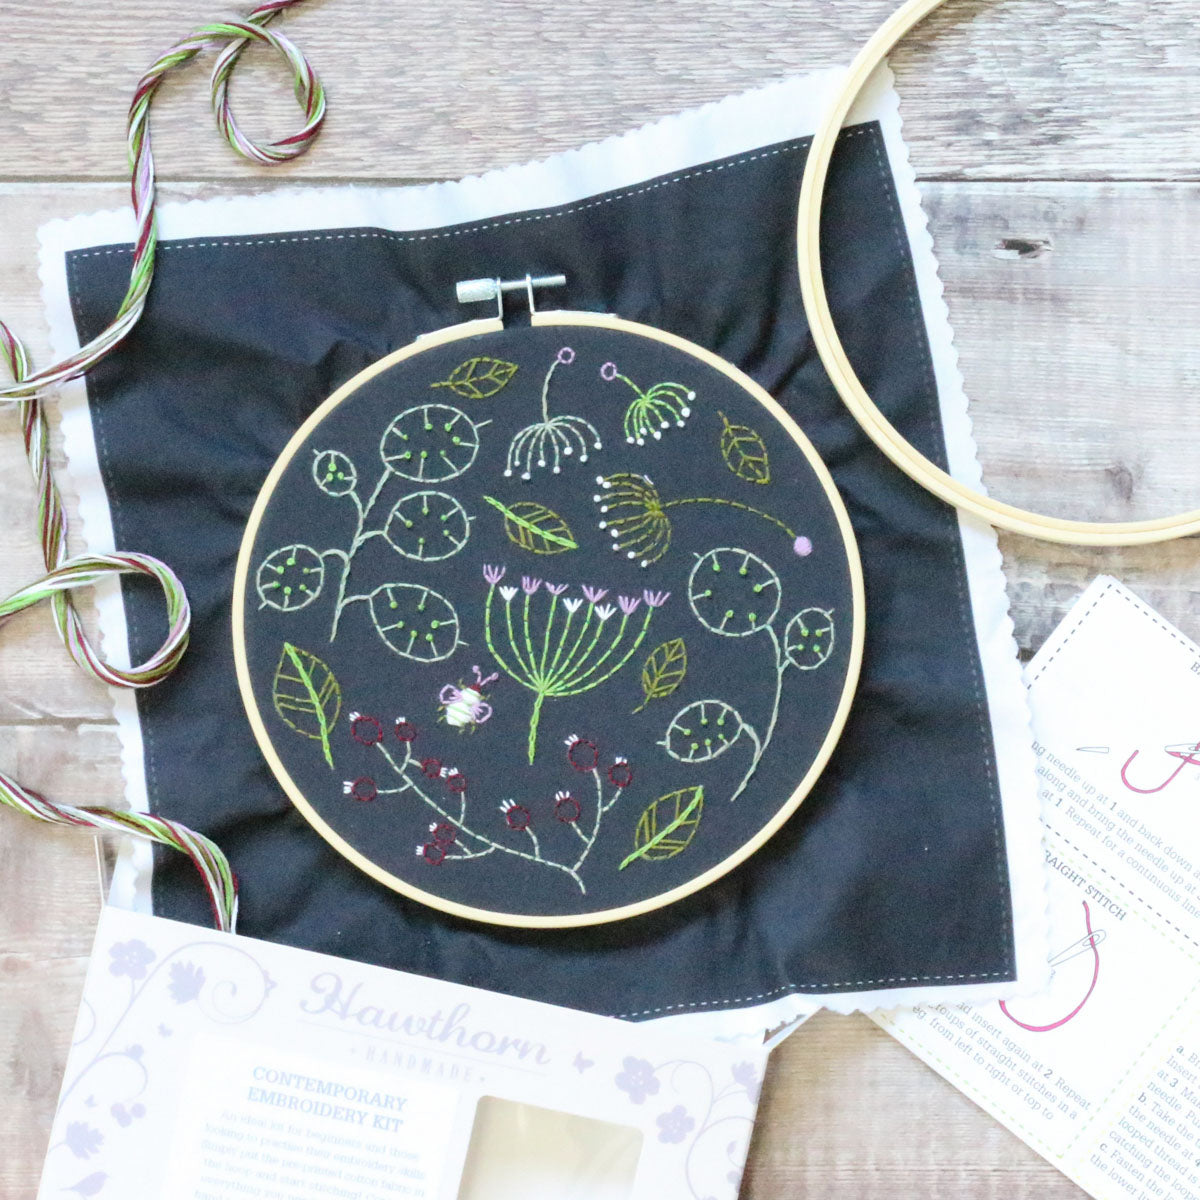 Black Canvas Tote Bag Embroidery Kit,Flowers Art Pattern,Cross Stitch Kits,  Including Stamped Embroidery Bag with Hoops,Needle, Instruction Manual and